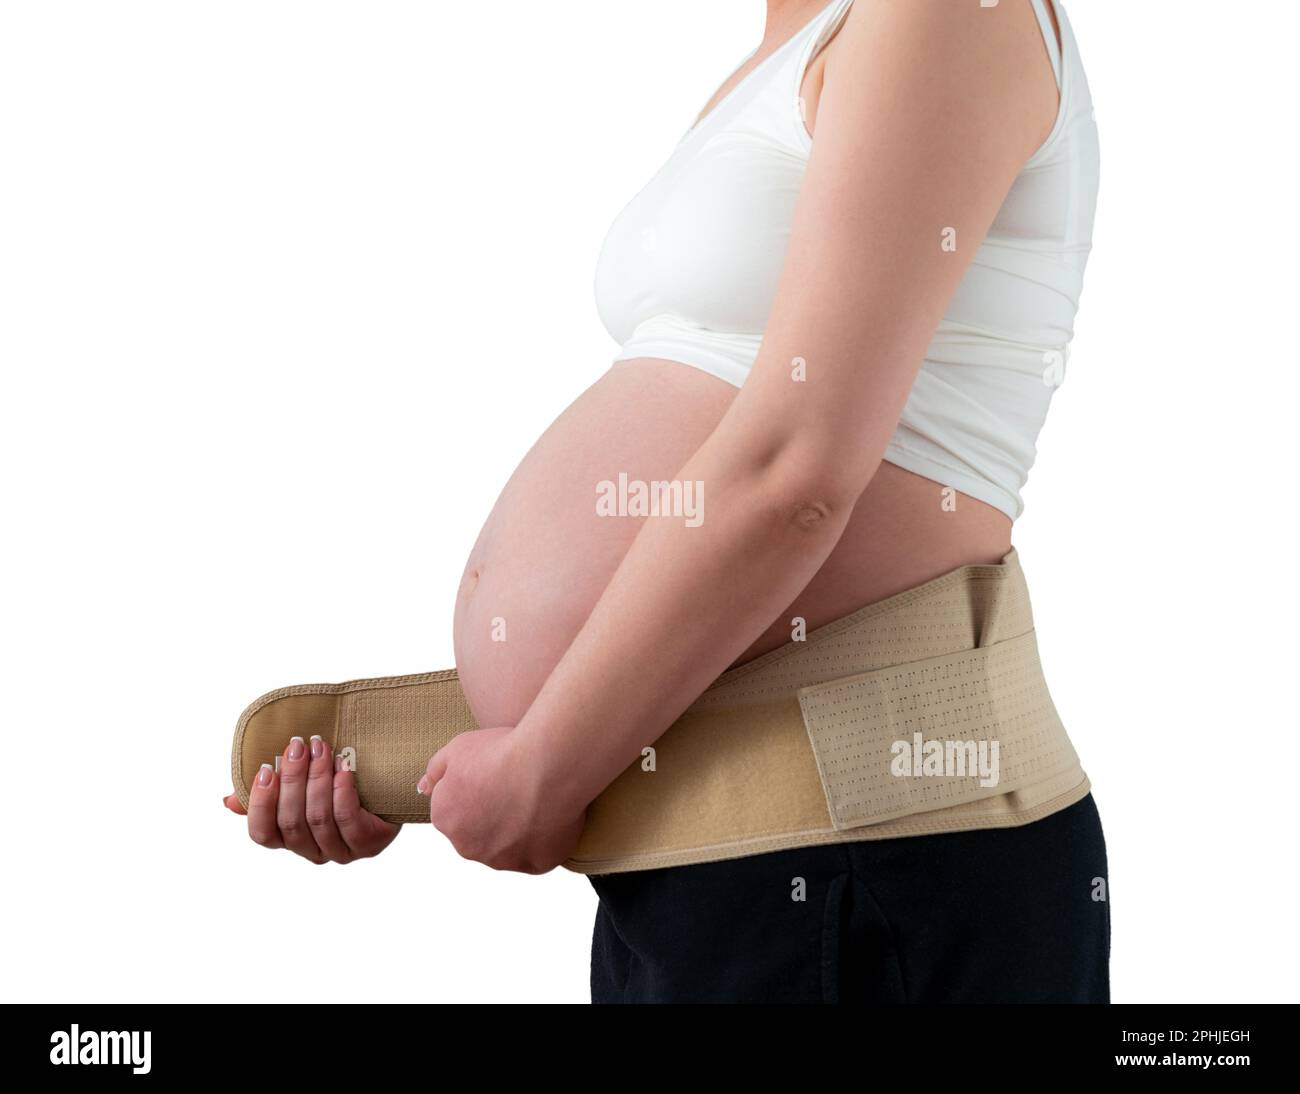 Pregnant woman putting on supporting bandage to reduce backache. Orthopedic  abdominal support belt concept isolated on white background Stock Photo -  Alamy